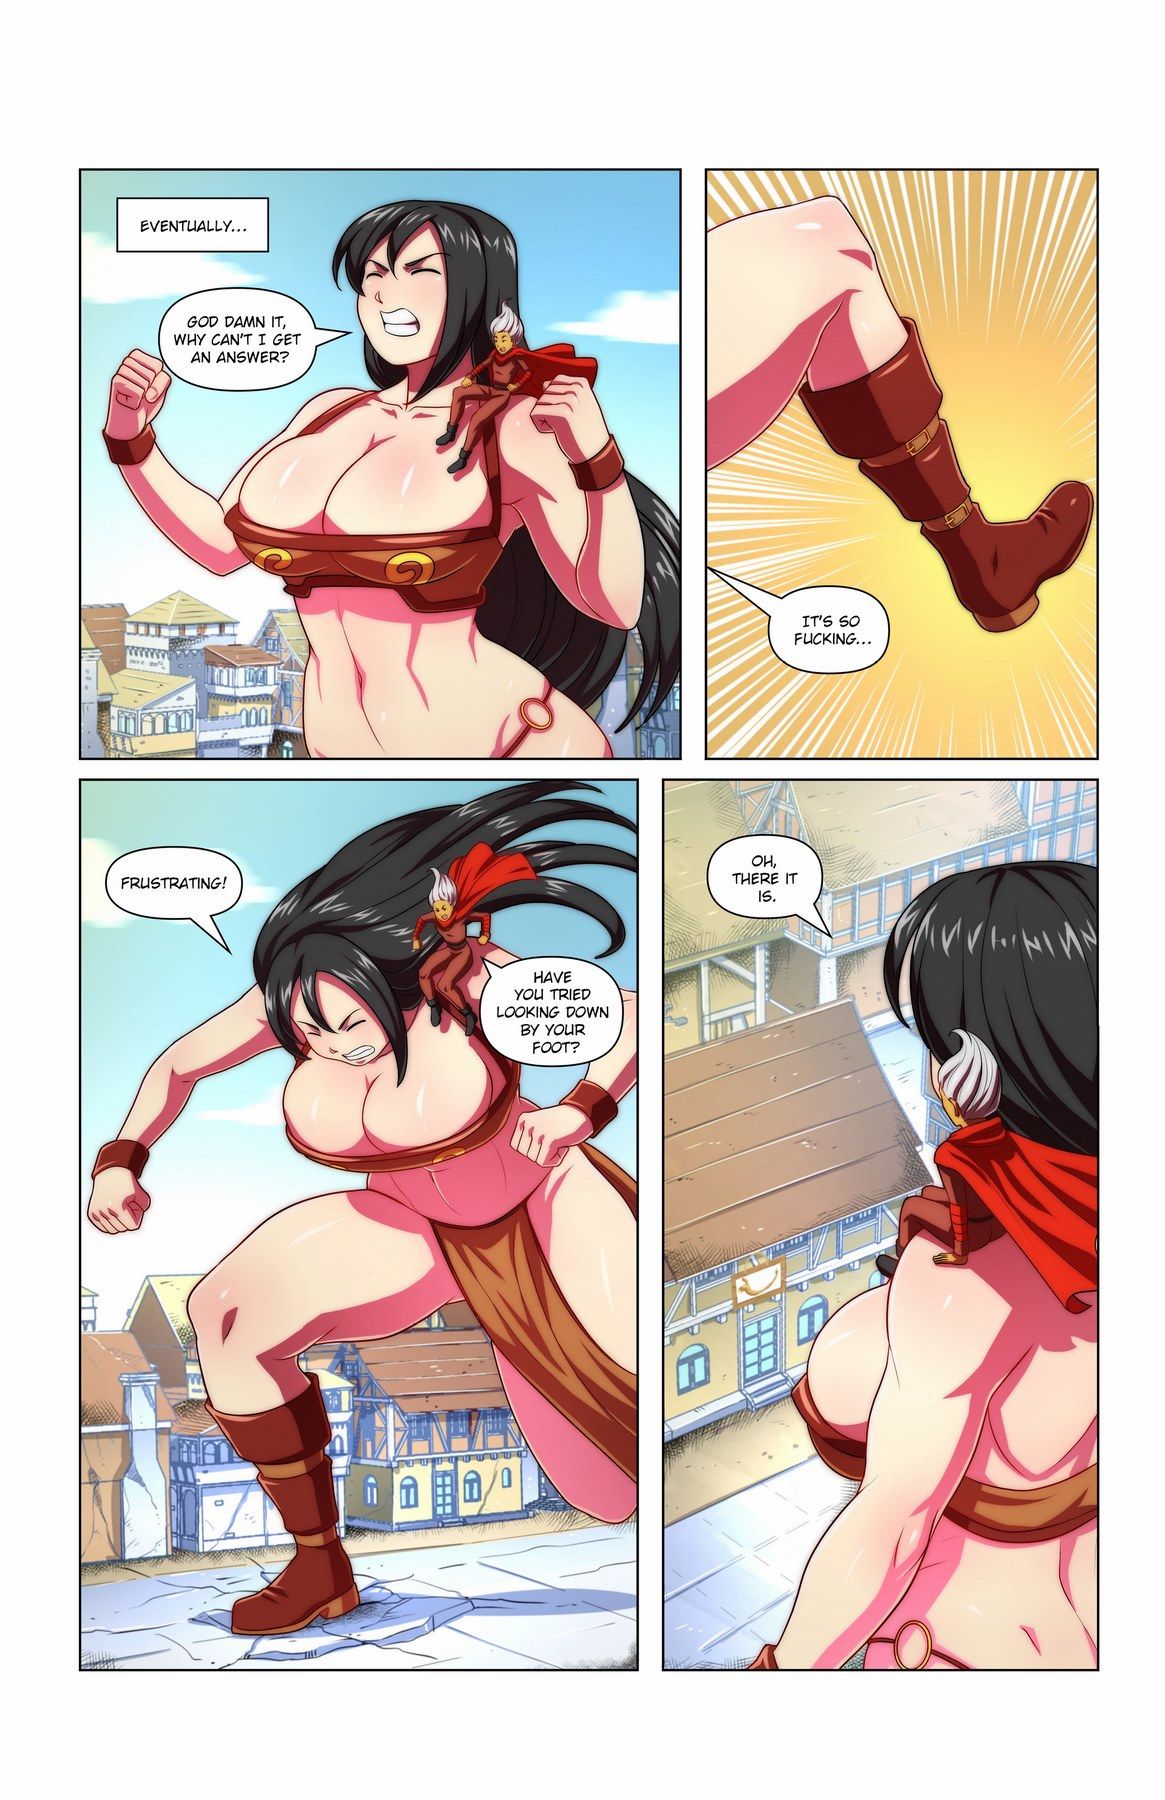 Giantess RPG Issue 2 GiantessFan page 12